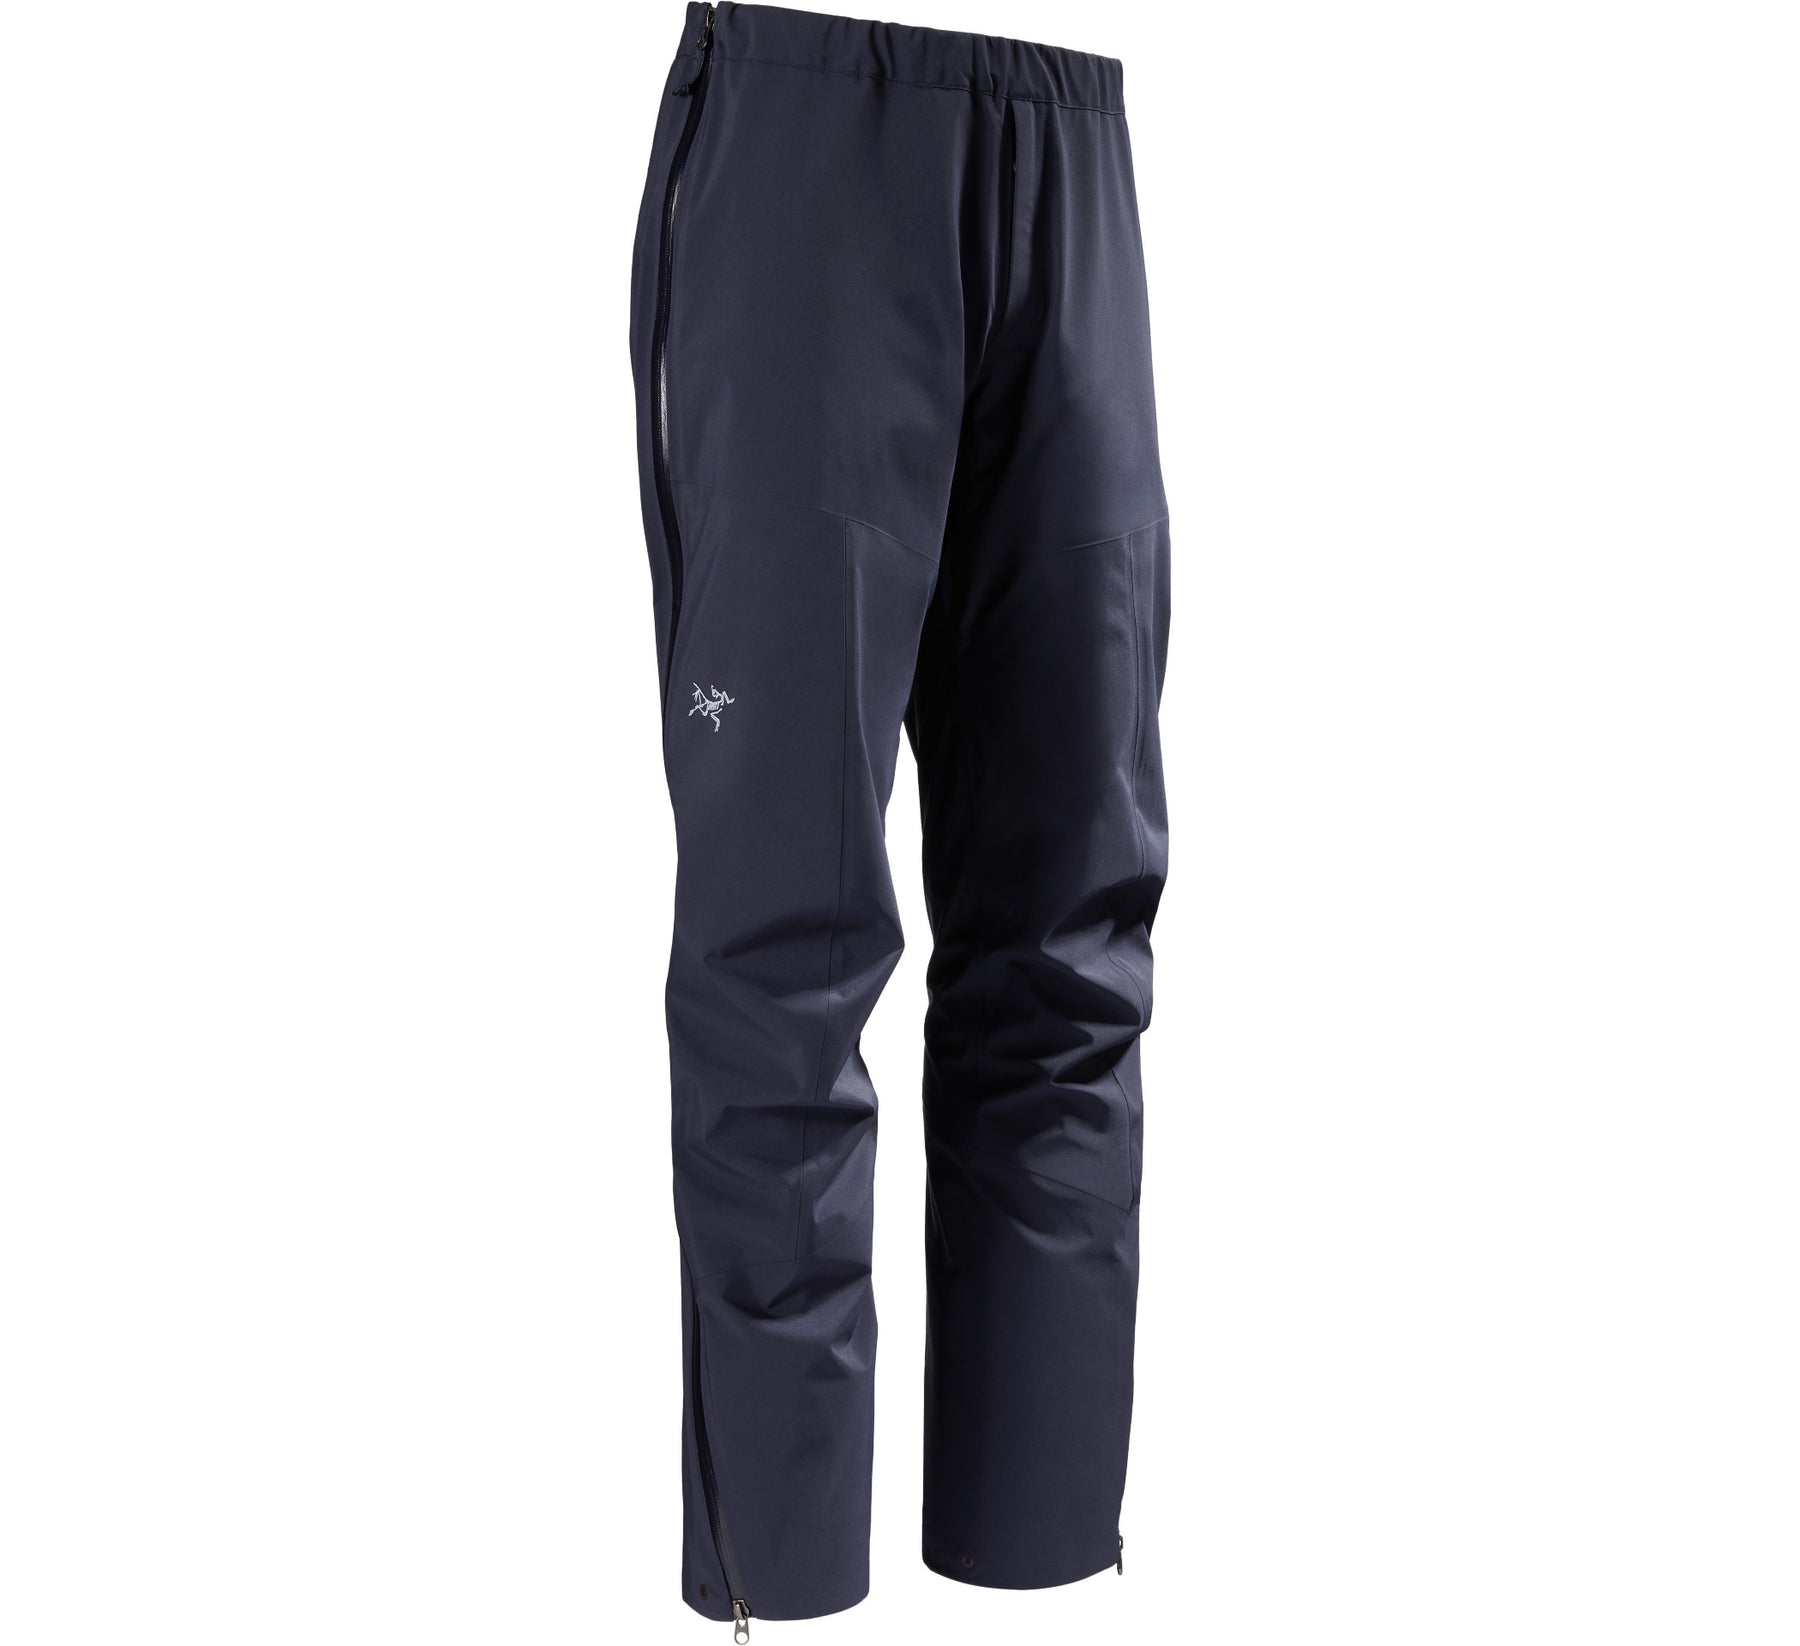 Beta Pant Men's – Feathered Friends